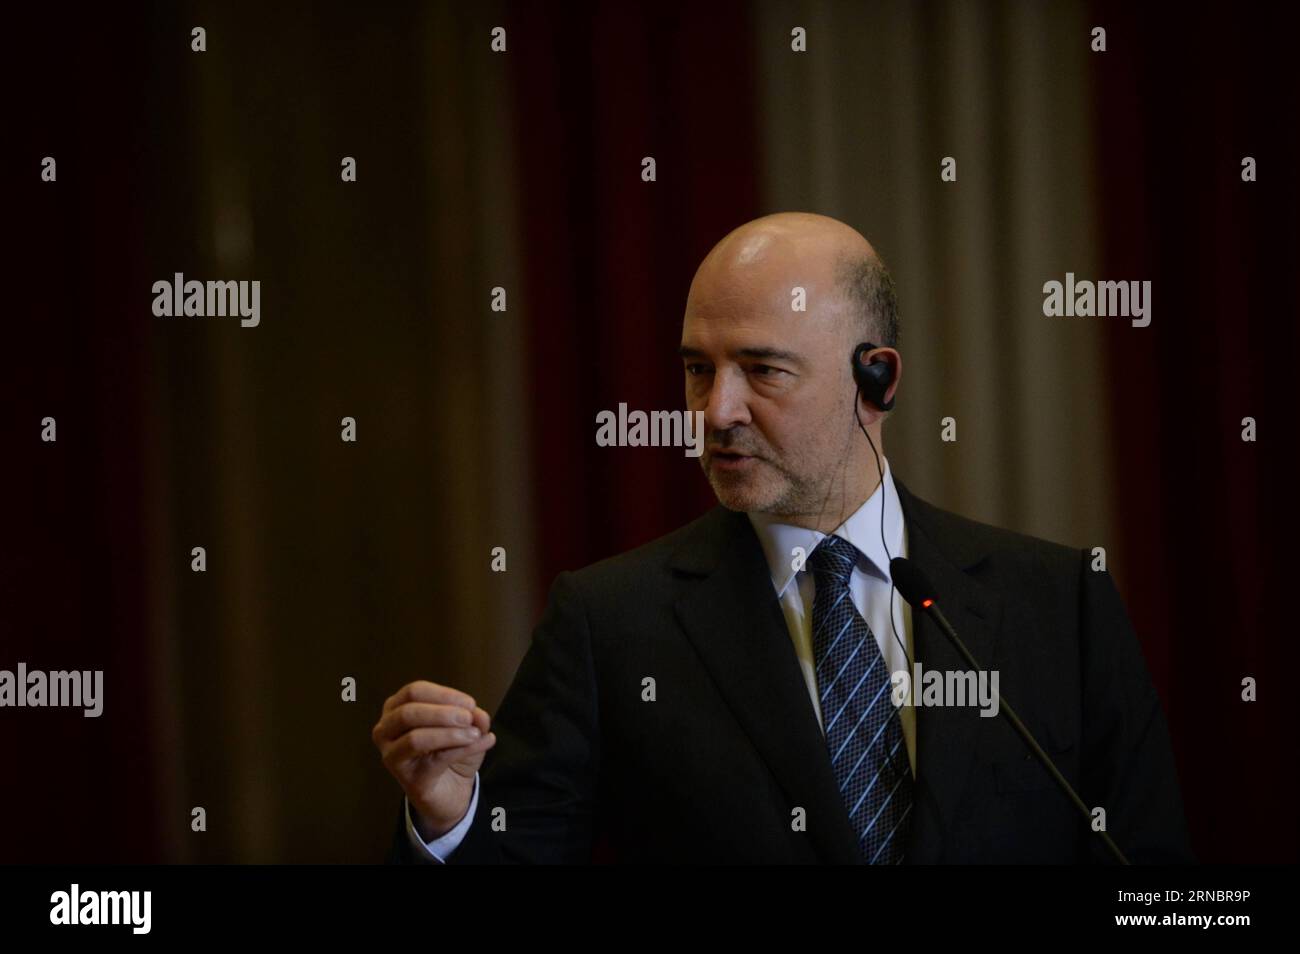 (160310) -- LISBON, March 10, 2016 -- European Commissioner for Economic and Financial Affairs Pierre Moscovici speaks during a press conference in Lisbon, Portugal, March 10, 2016. European Commissioner for Economic and Financial Affairs Pierre Moscovici said here on Thursday that he will be working closely with the Portuguese government to put the country back on track. ) PORTUGAL-LISBON-EU-FINANCE ZhangxLiyun PUBLICATIONxNOTxINxCHN   160310 Lisbon March 10 2016 European Commissioner for Economic and Financial Affairs Pierre Moscovici Speaks during a Press Conference in Lisbon Portugal March Stock Photo